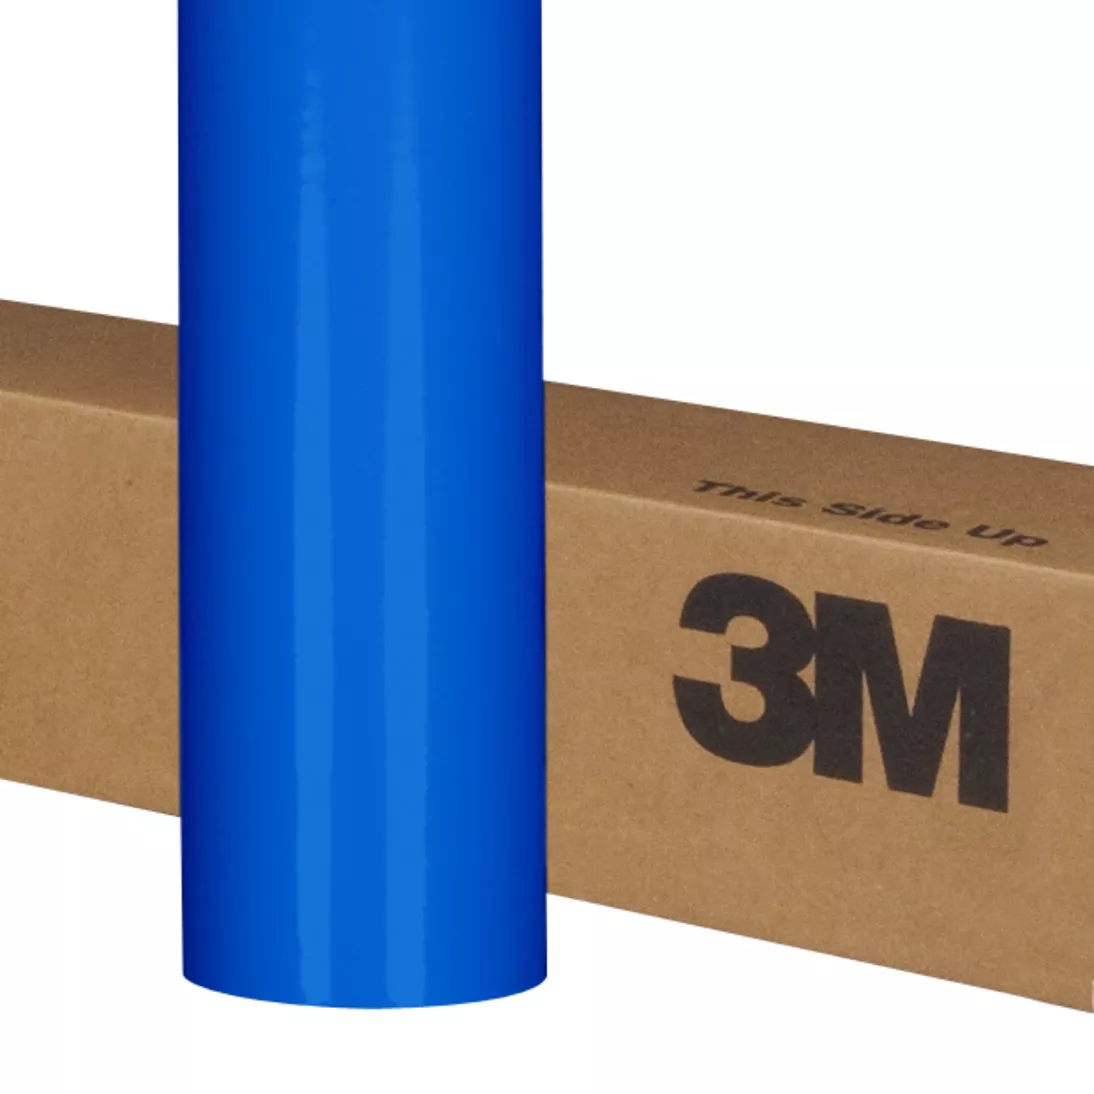 3M™ Scotchcal™ Translucent Graphic Film 3630-337, Process Blue, 48 in x
250 yd